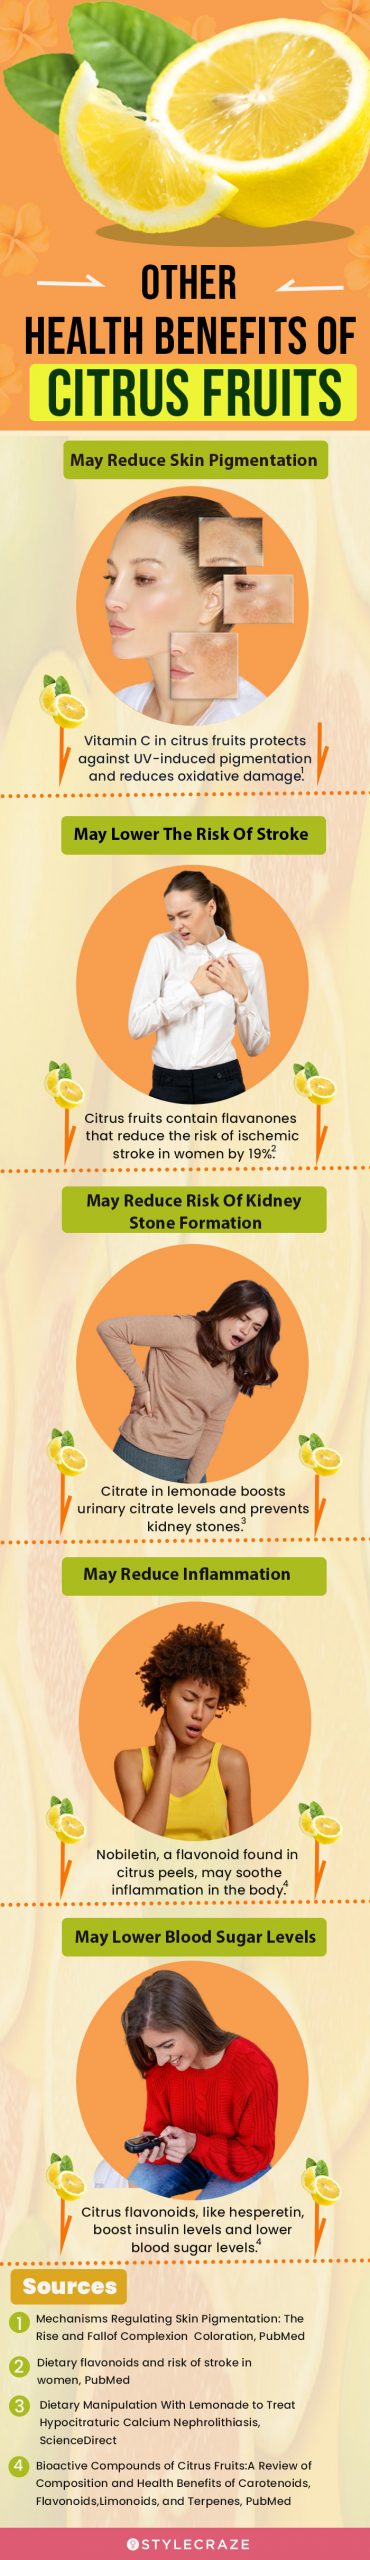 other benefits of citrus fruits (infographic)